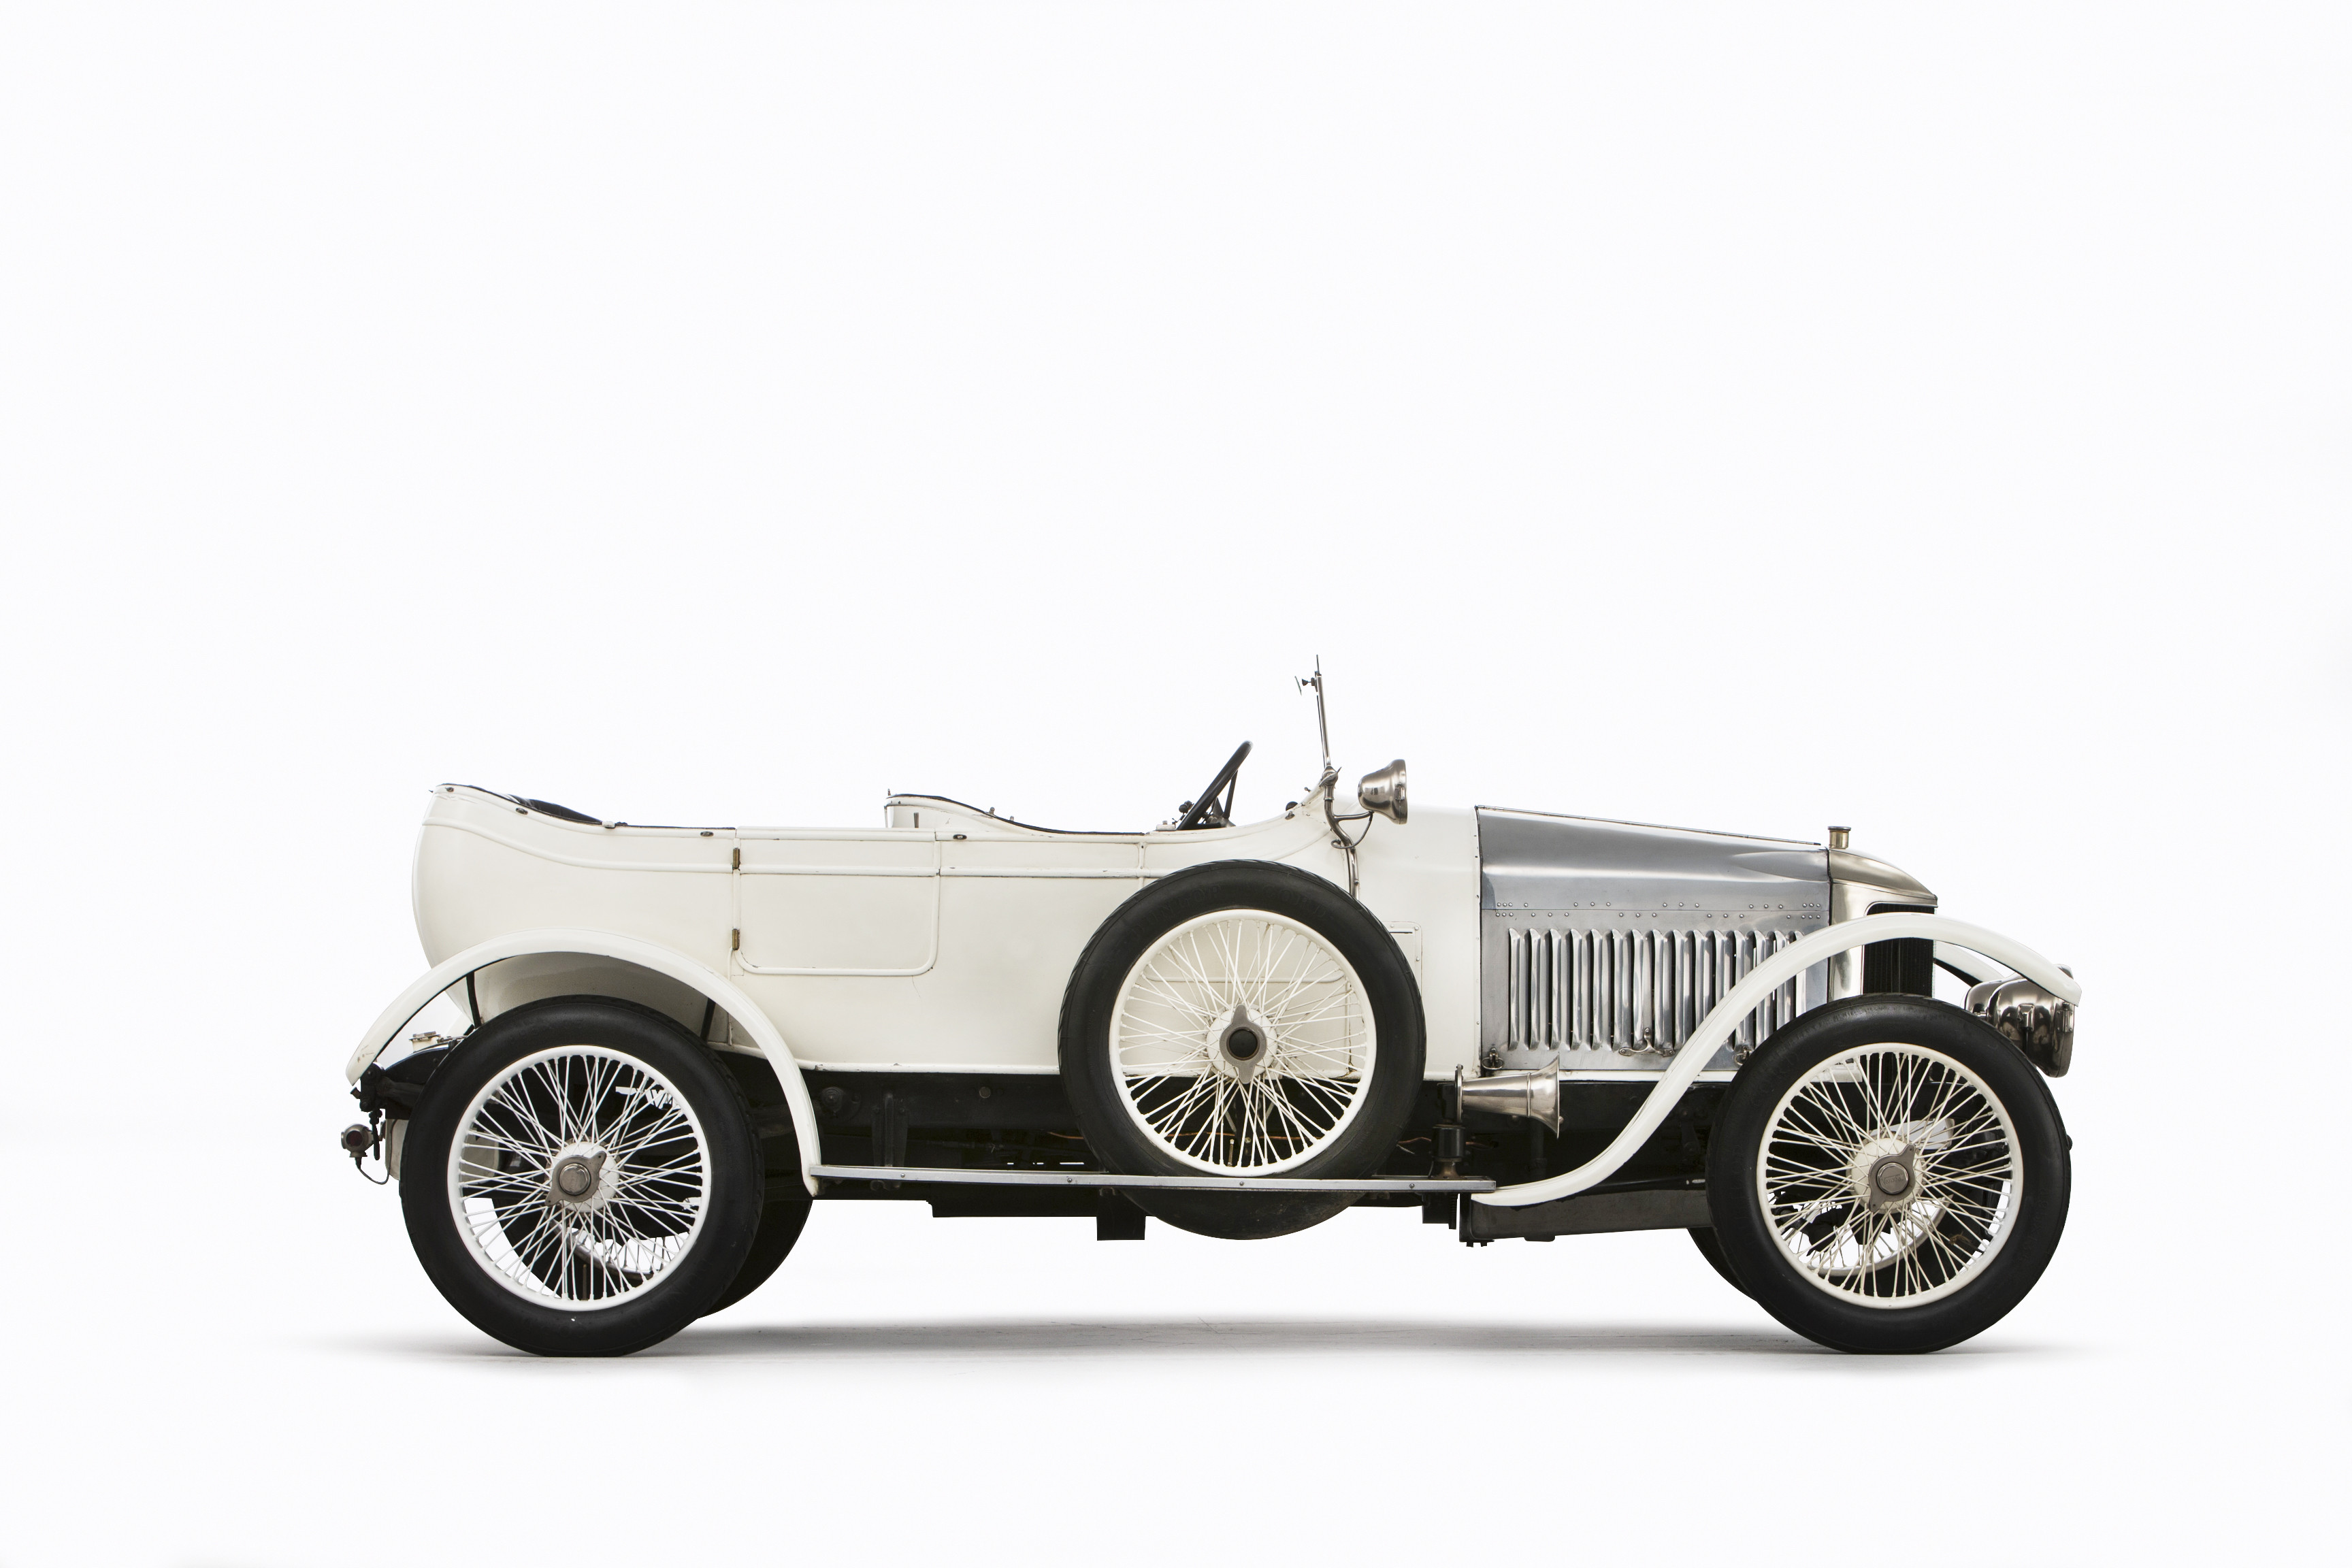 World's first sports car' sells for $657K - CNN Style